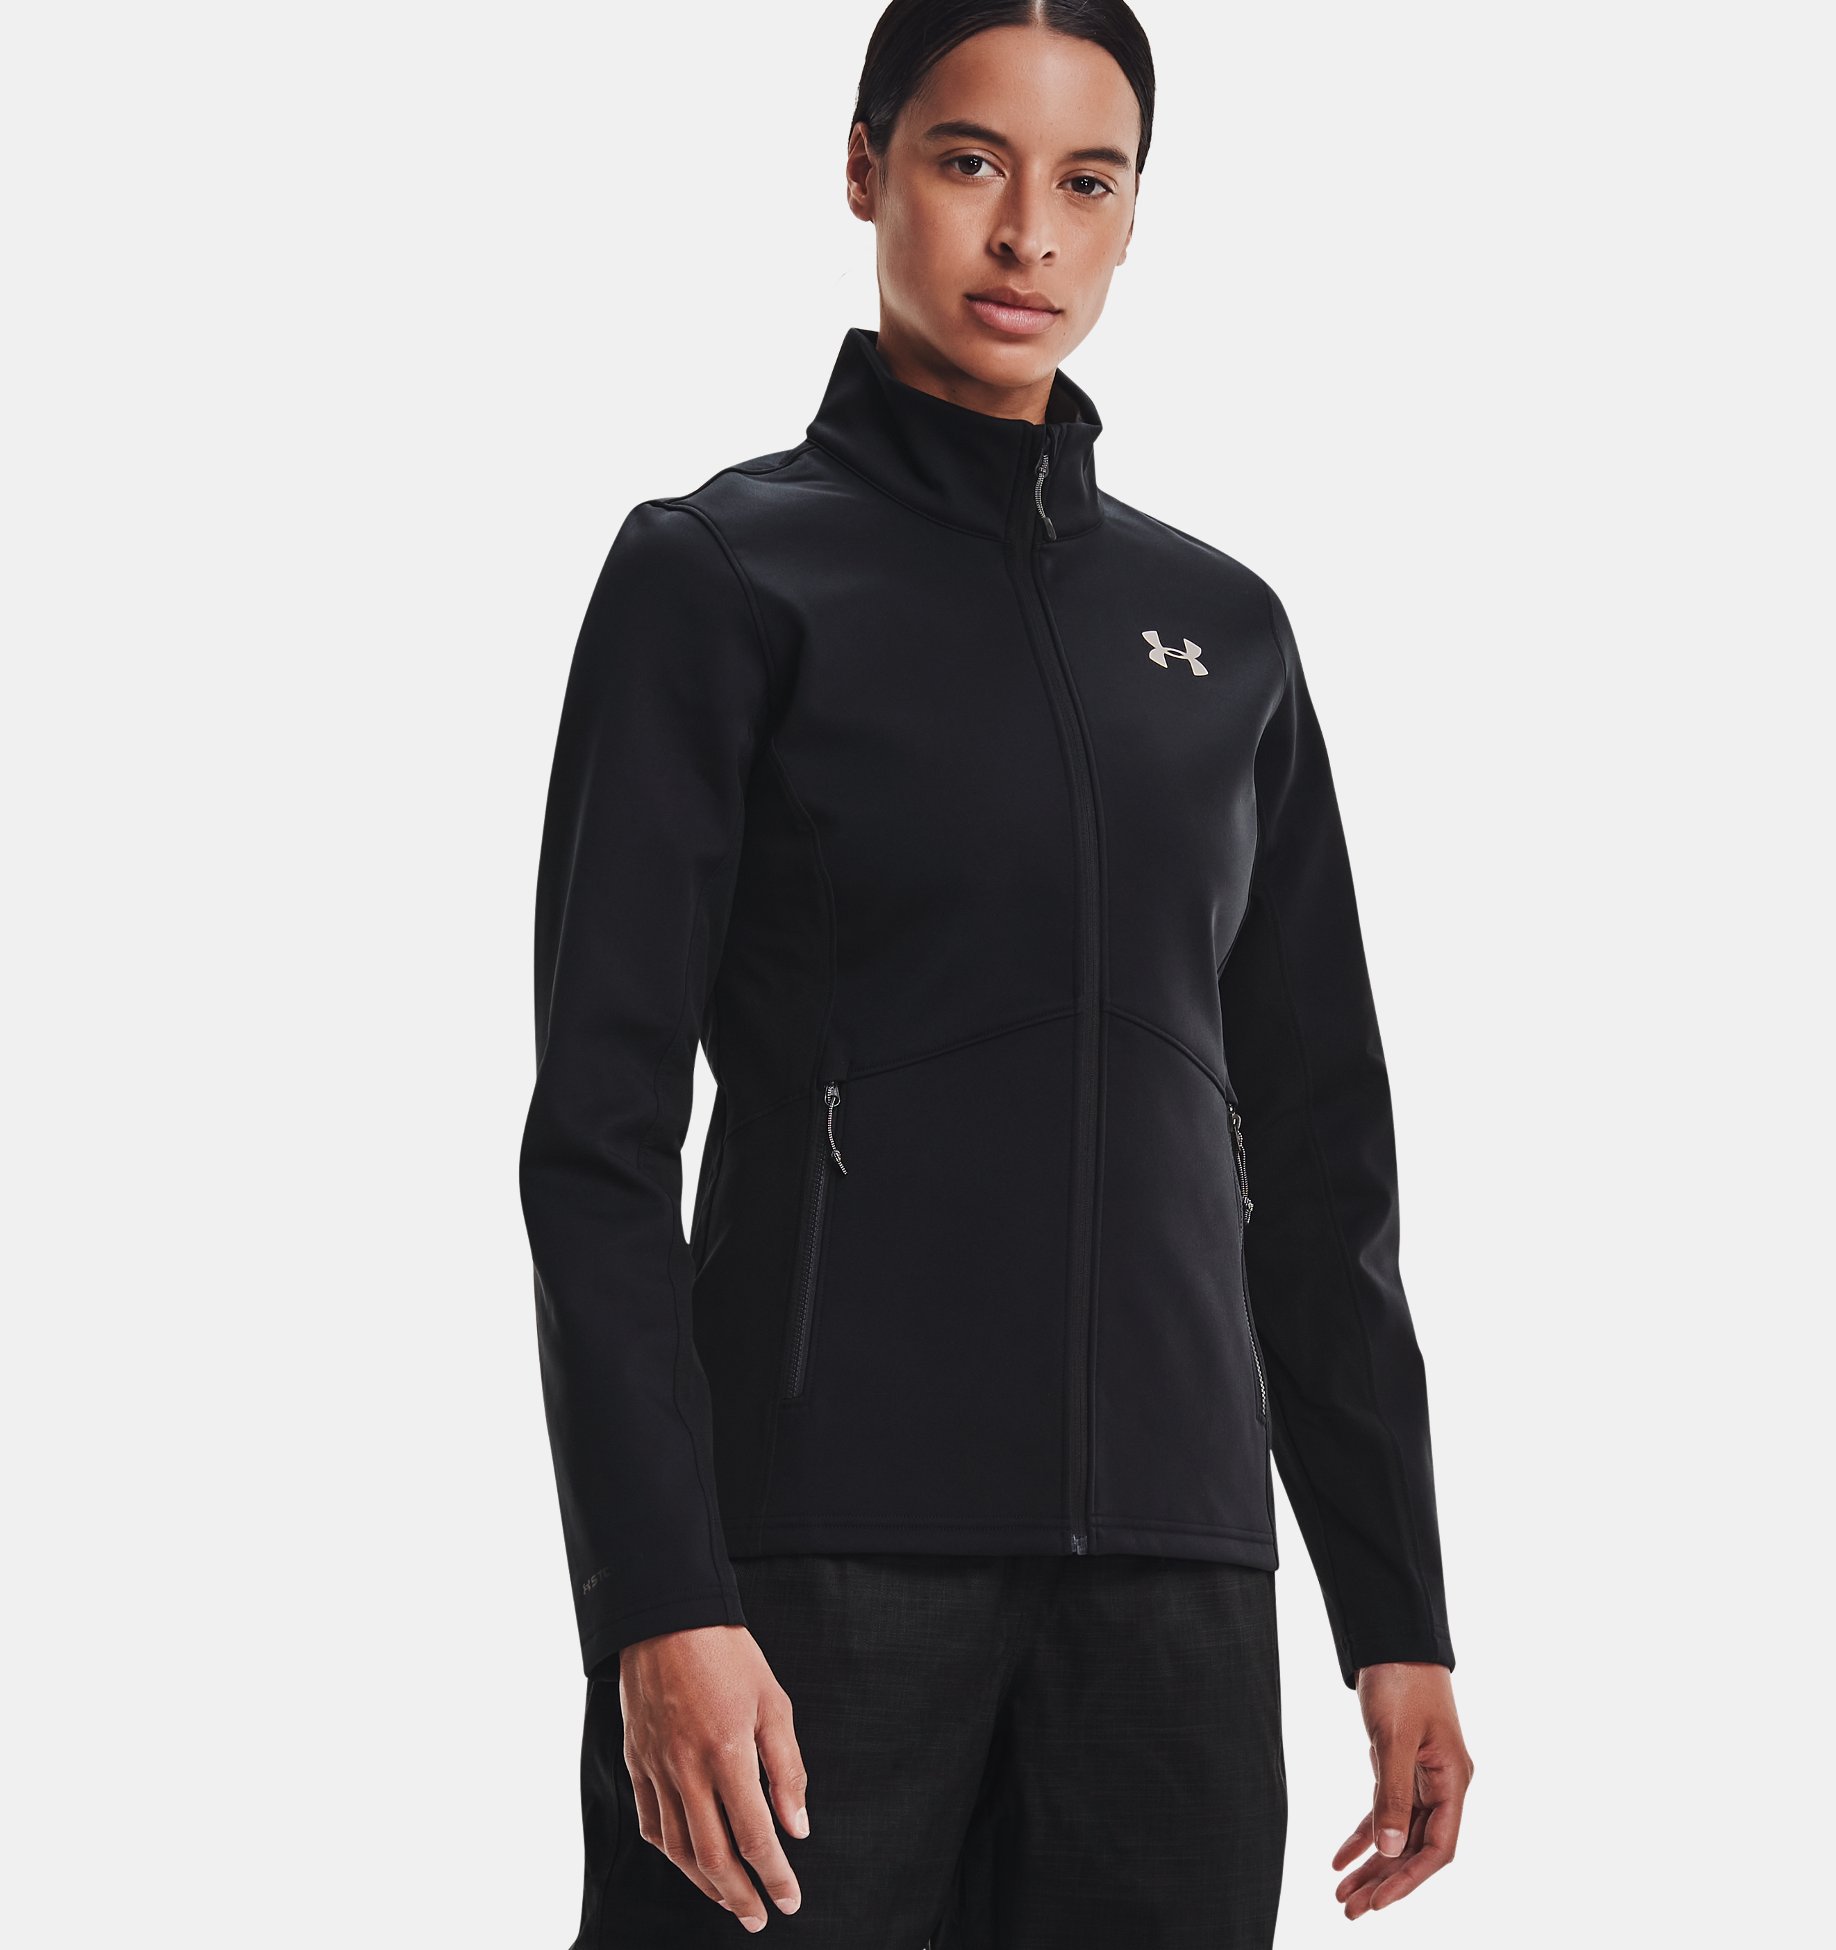 Voorzitter Conceit T Women's UA Storm ColdGear® Infrared Shield Jacket | Under Armour